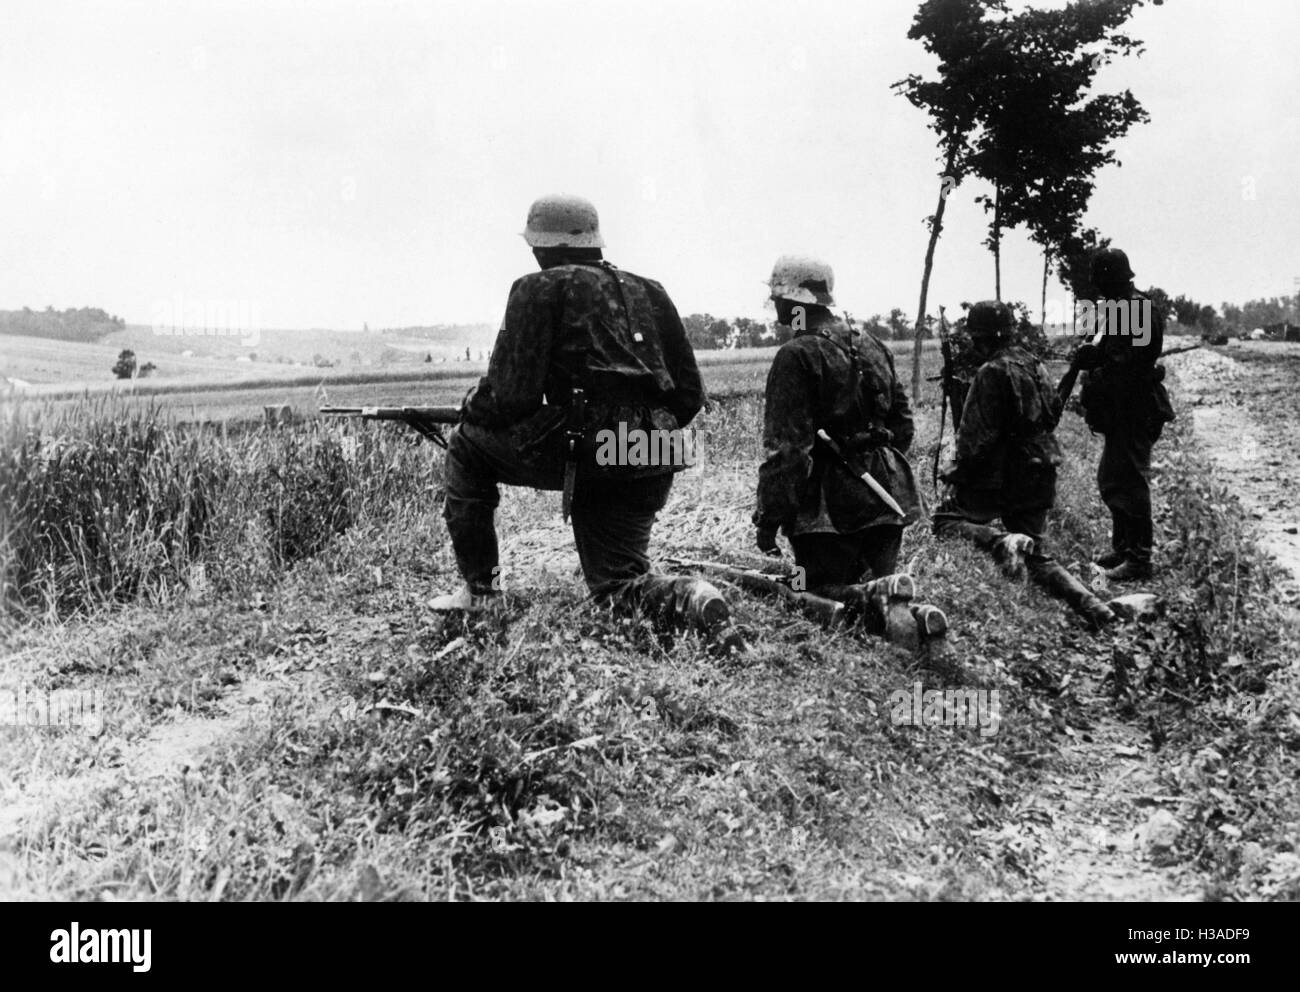 Infantry of the Waffen SS on the Eastern Front, 1941 Stock Photo